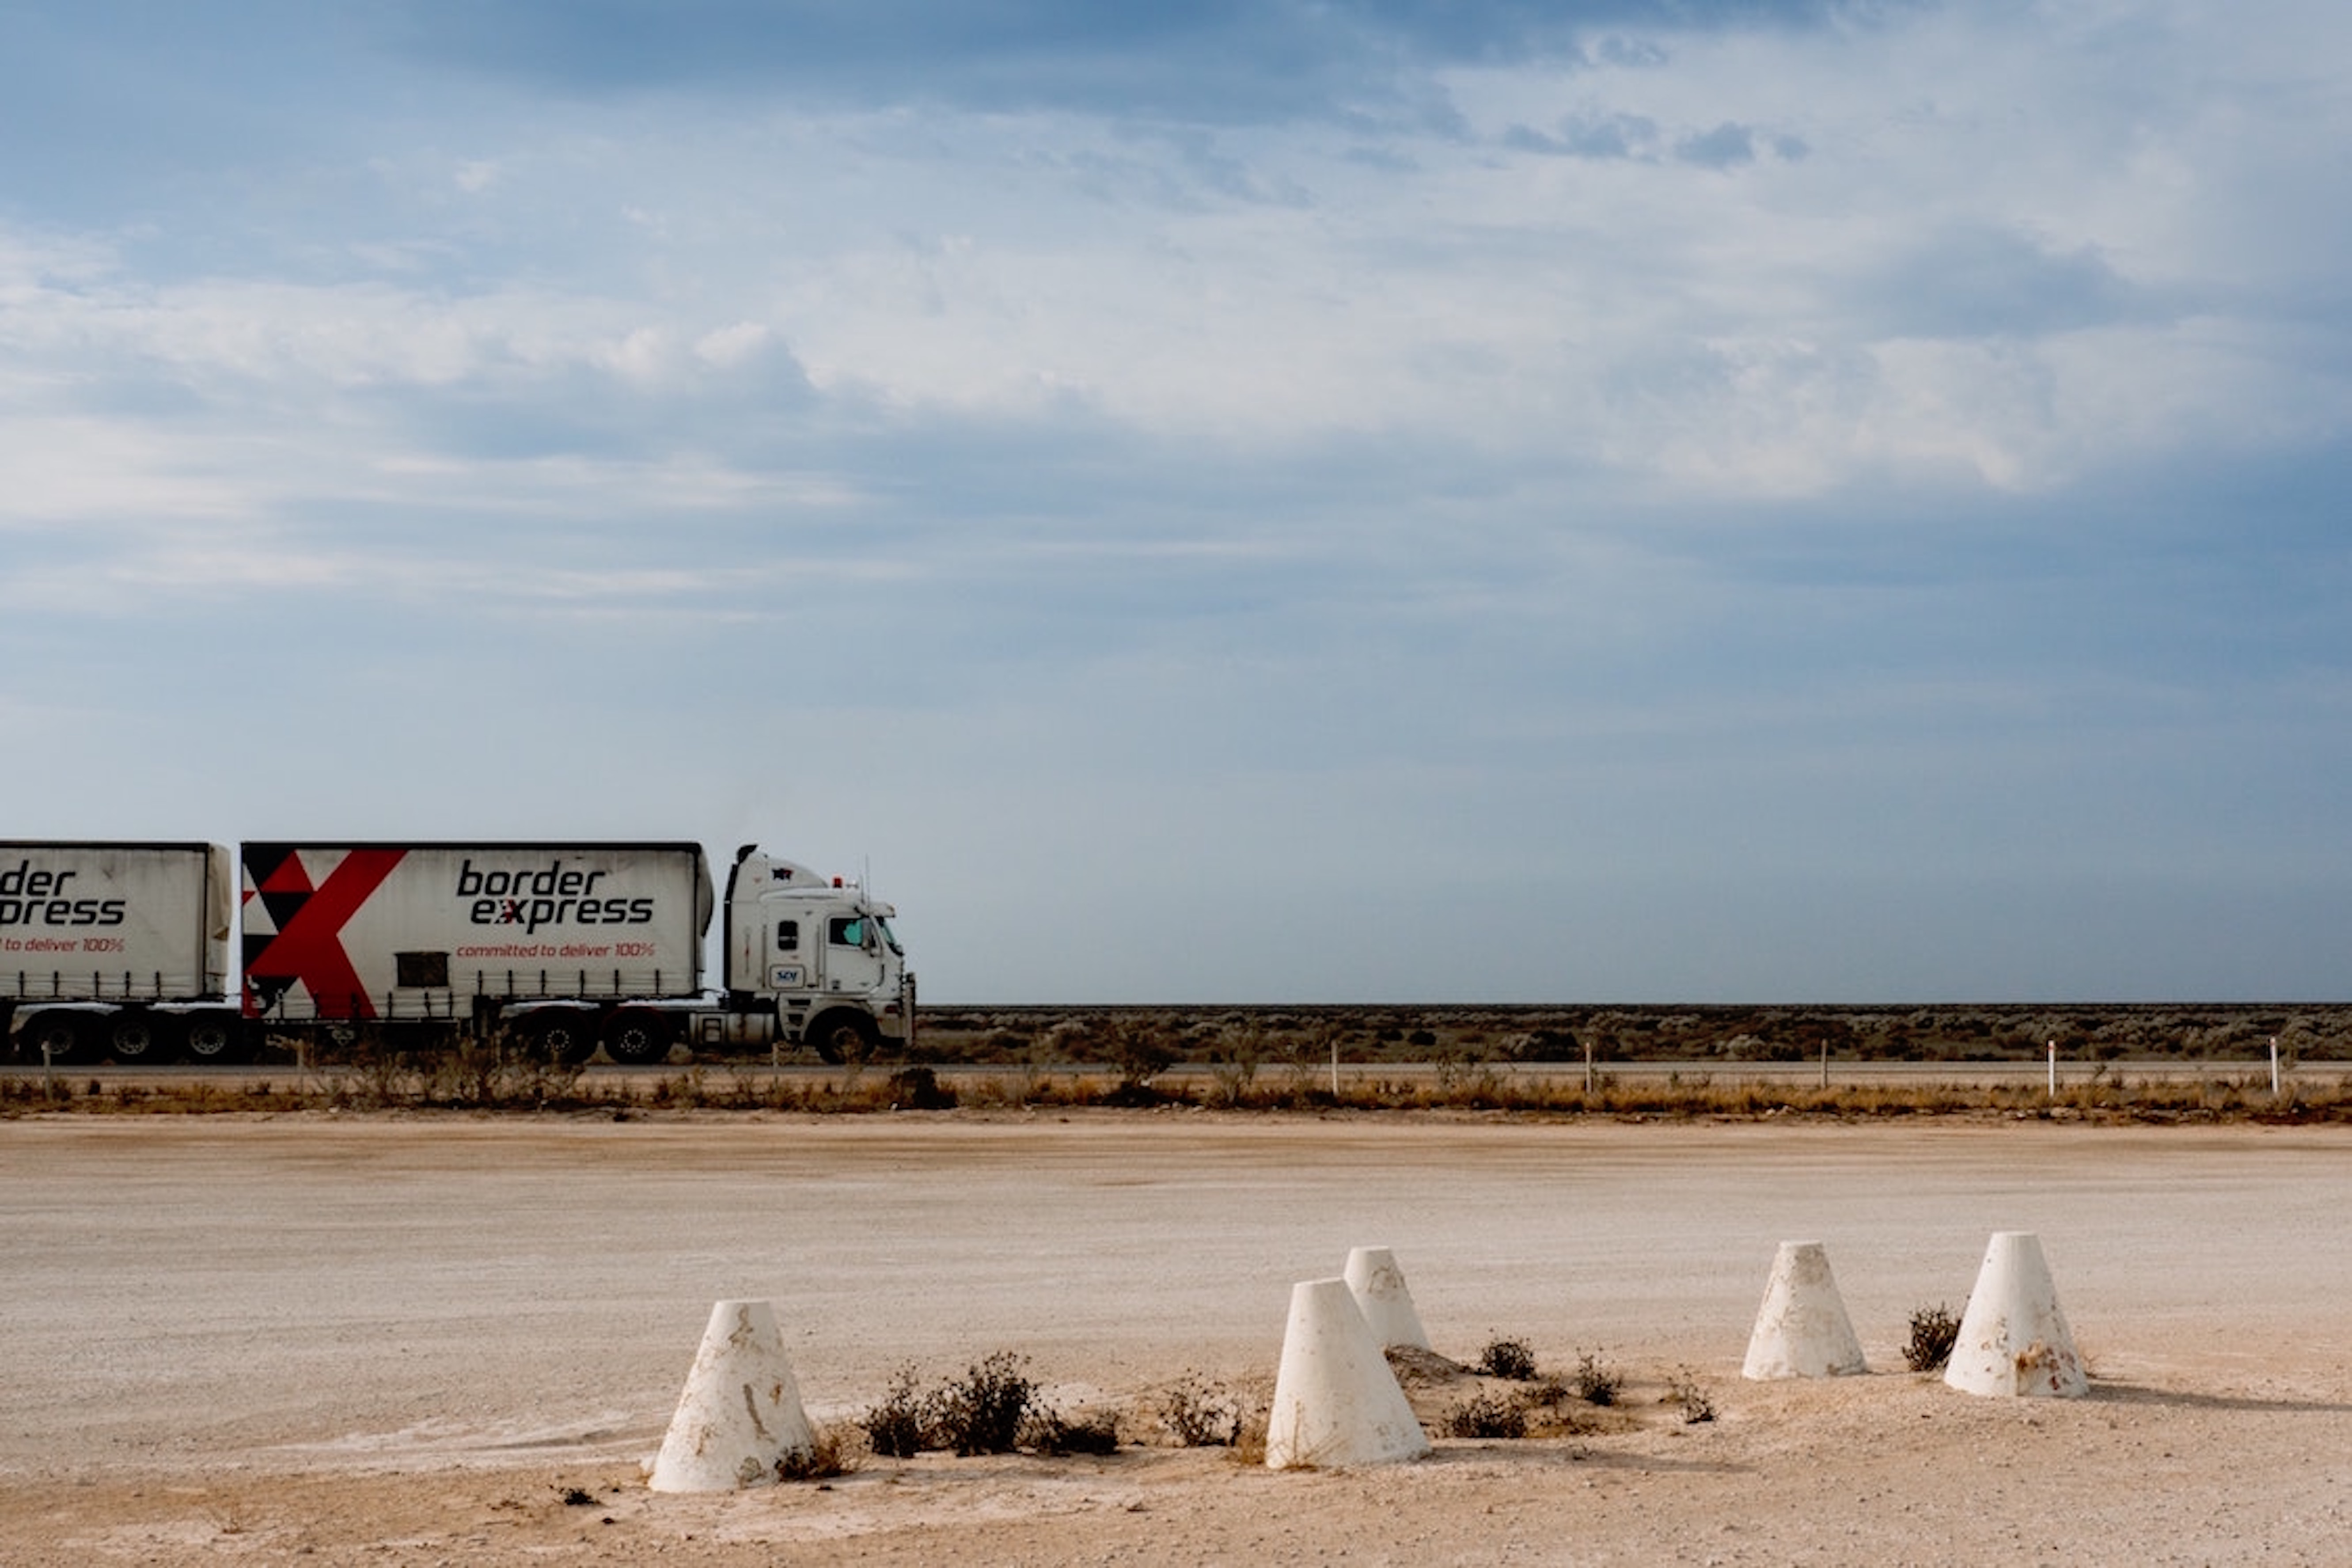 Cargo freight Semi-truck driving on a flat road in the desert with blue skies